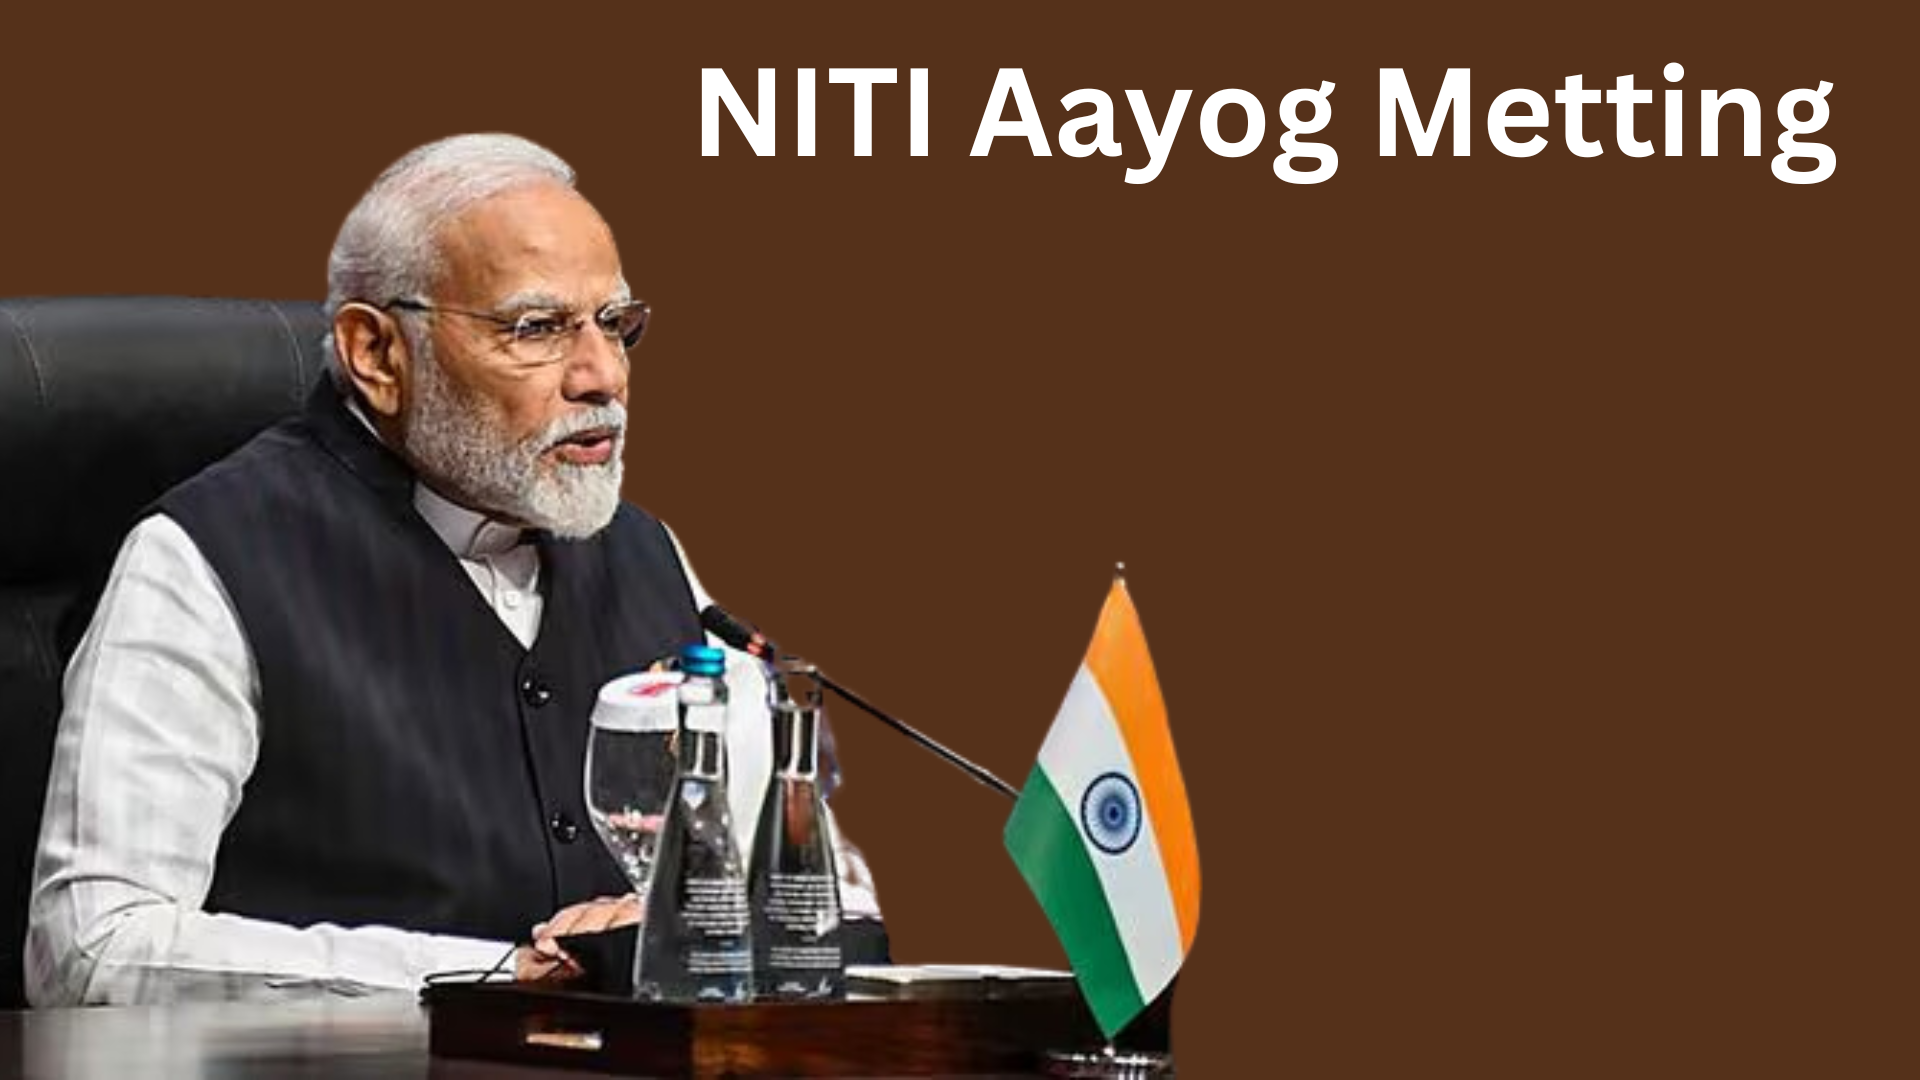 PM Modi To Chair The NITI Aayog Meeting, Several Opposition Leaders To Skip It